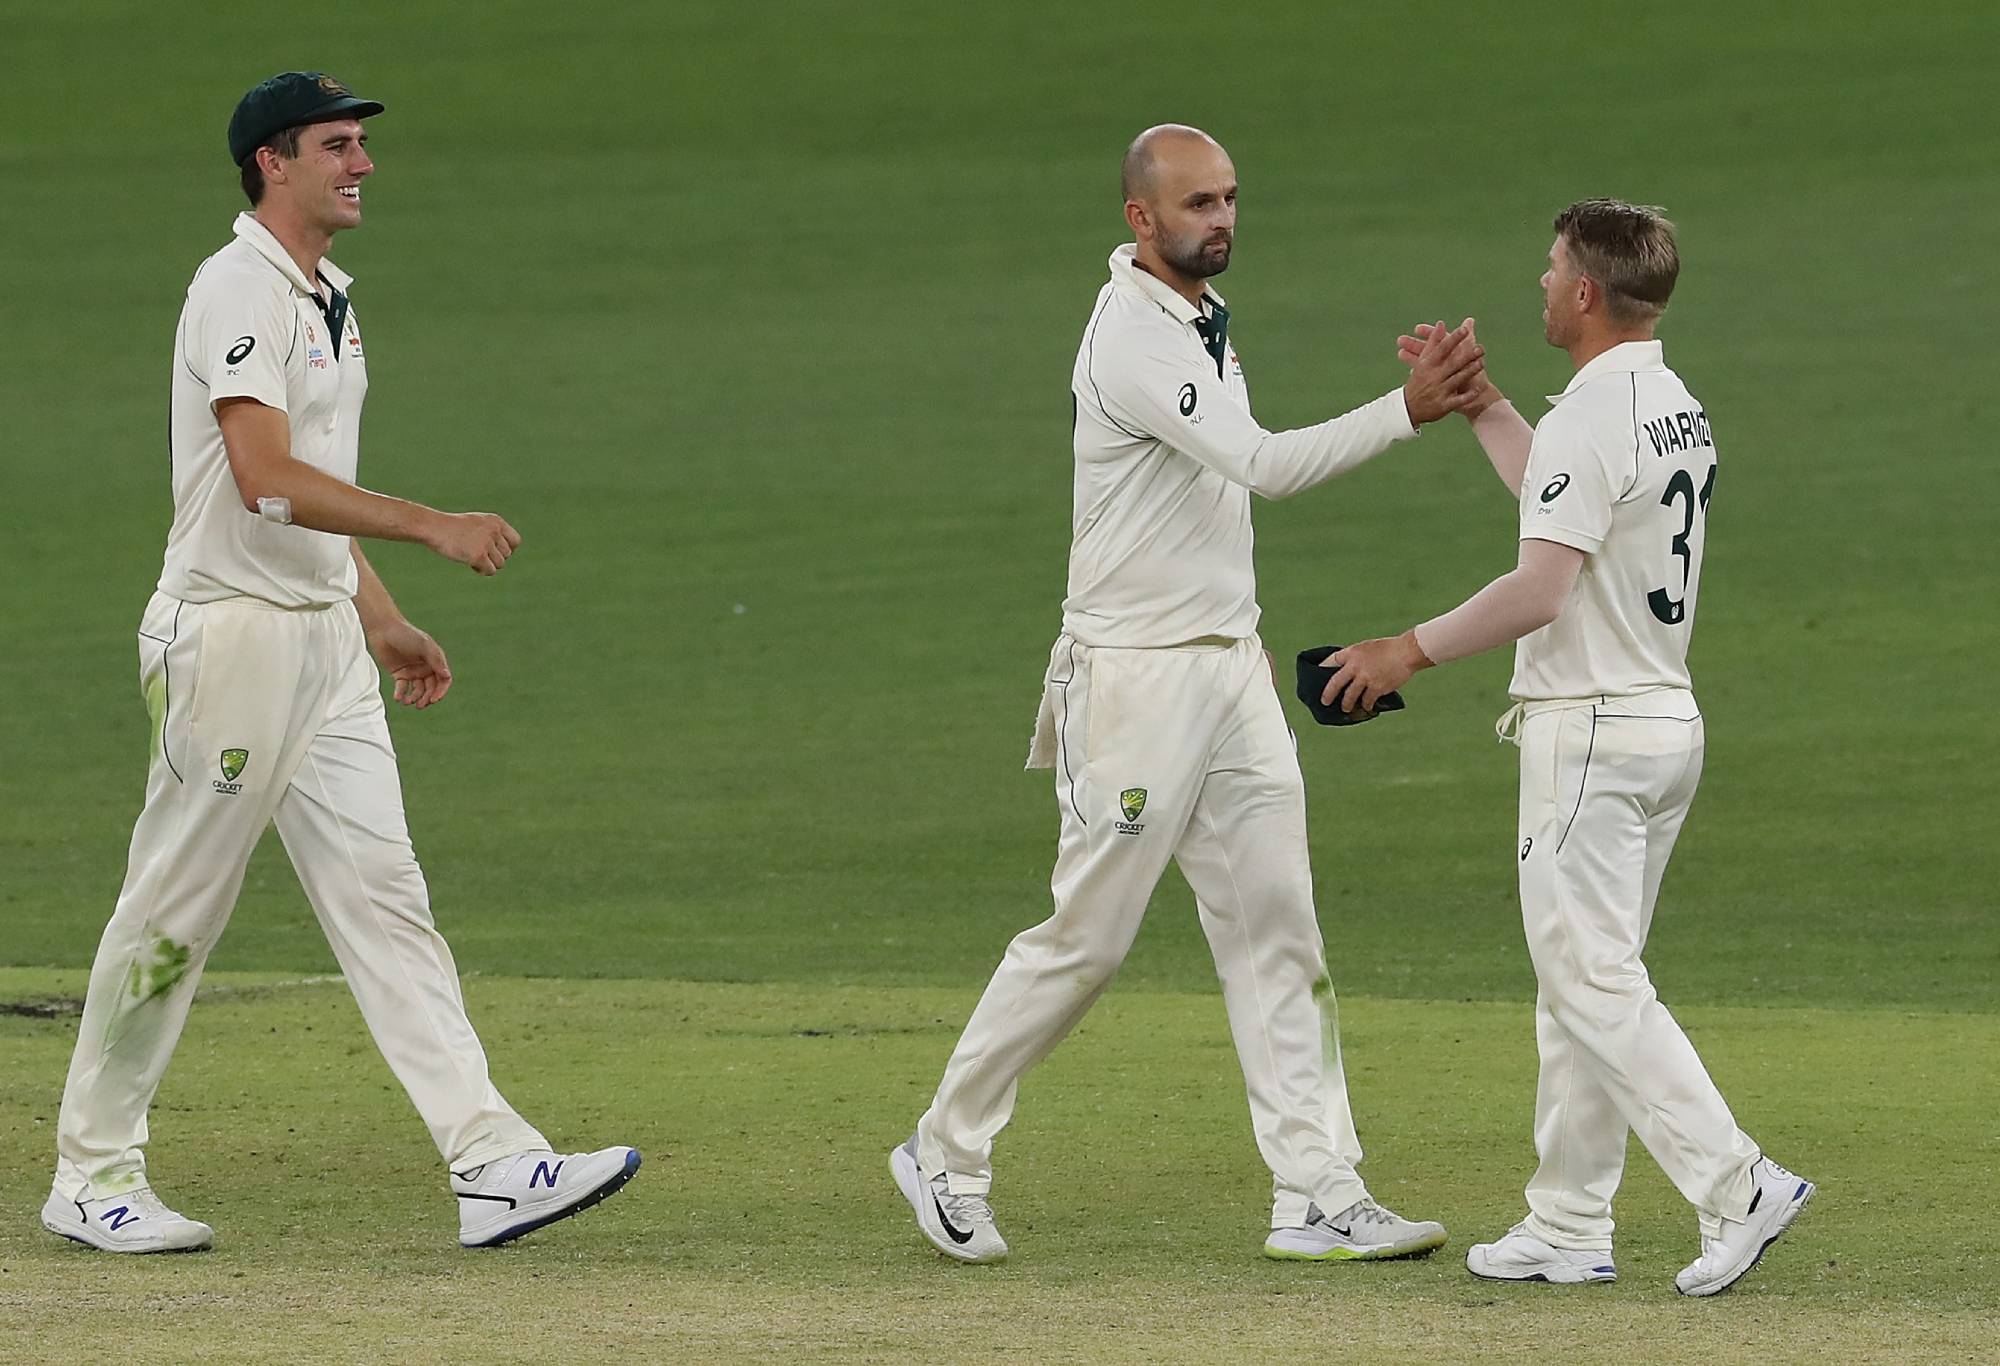 PERTH, AUSTRALIA - DECEMBER 15: Nathan Lyon and David Warner of Australia celebrate winning during day four of the First Test match in the series between Australia and New Zealand at Optus Stadium on December 15, 2019 in Perth, Australia. (Photo by Paul Kane - CA/Cricket Australia via Getty Images)